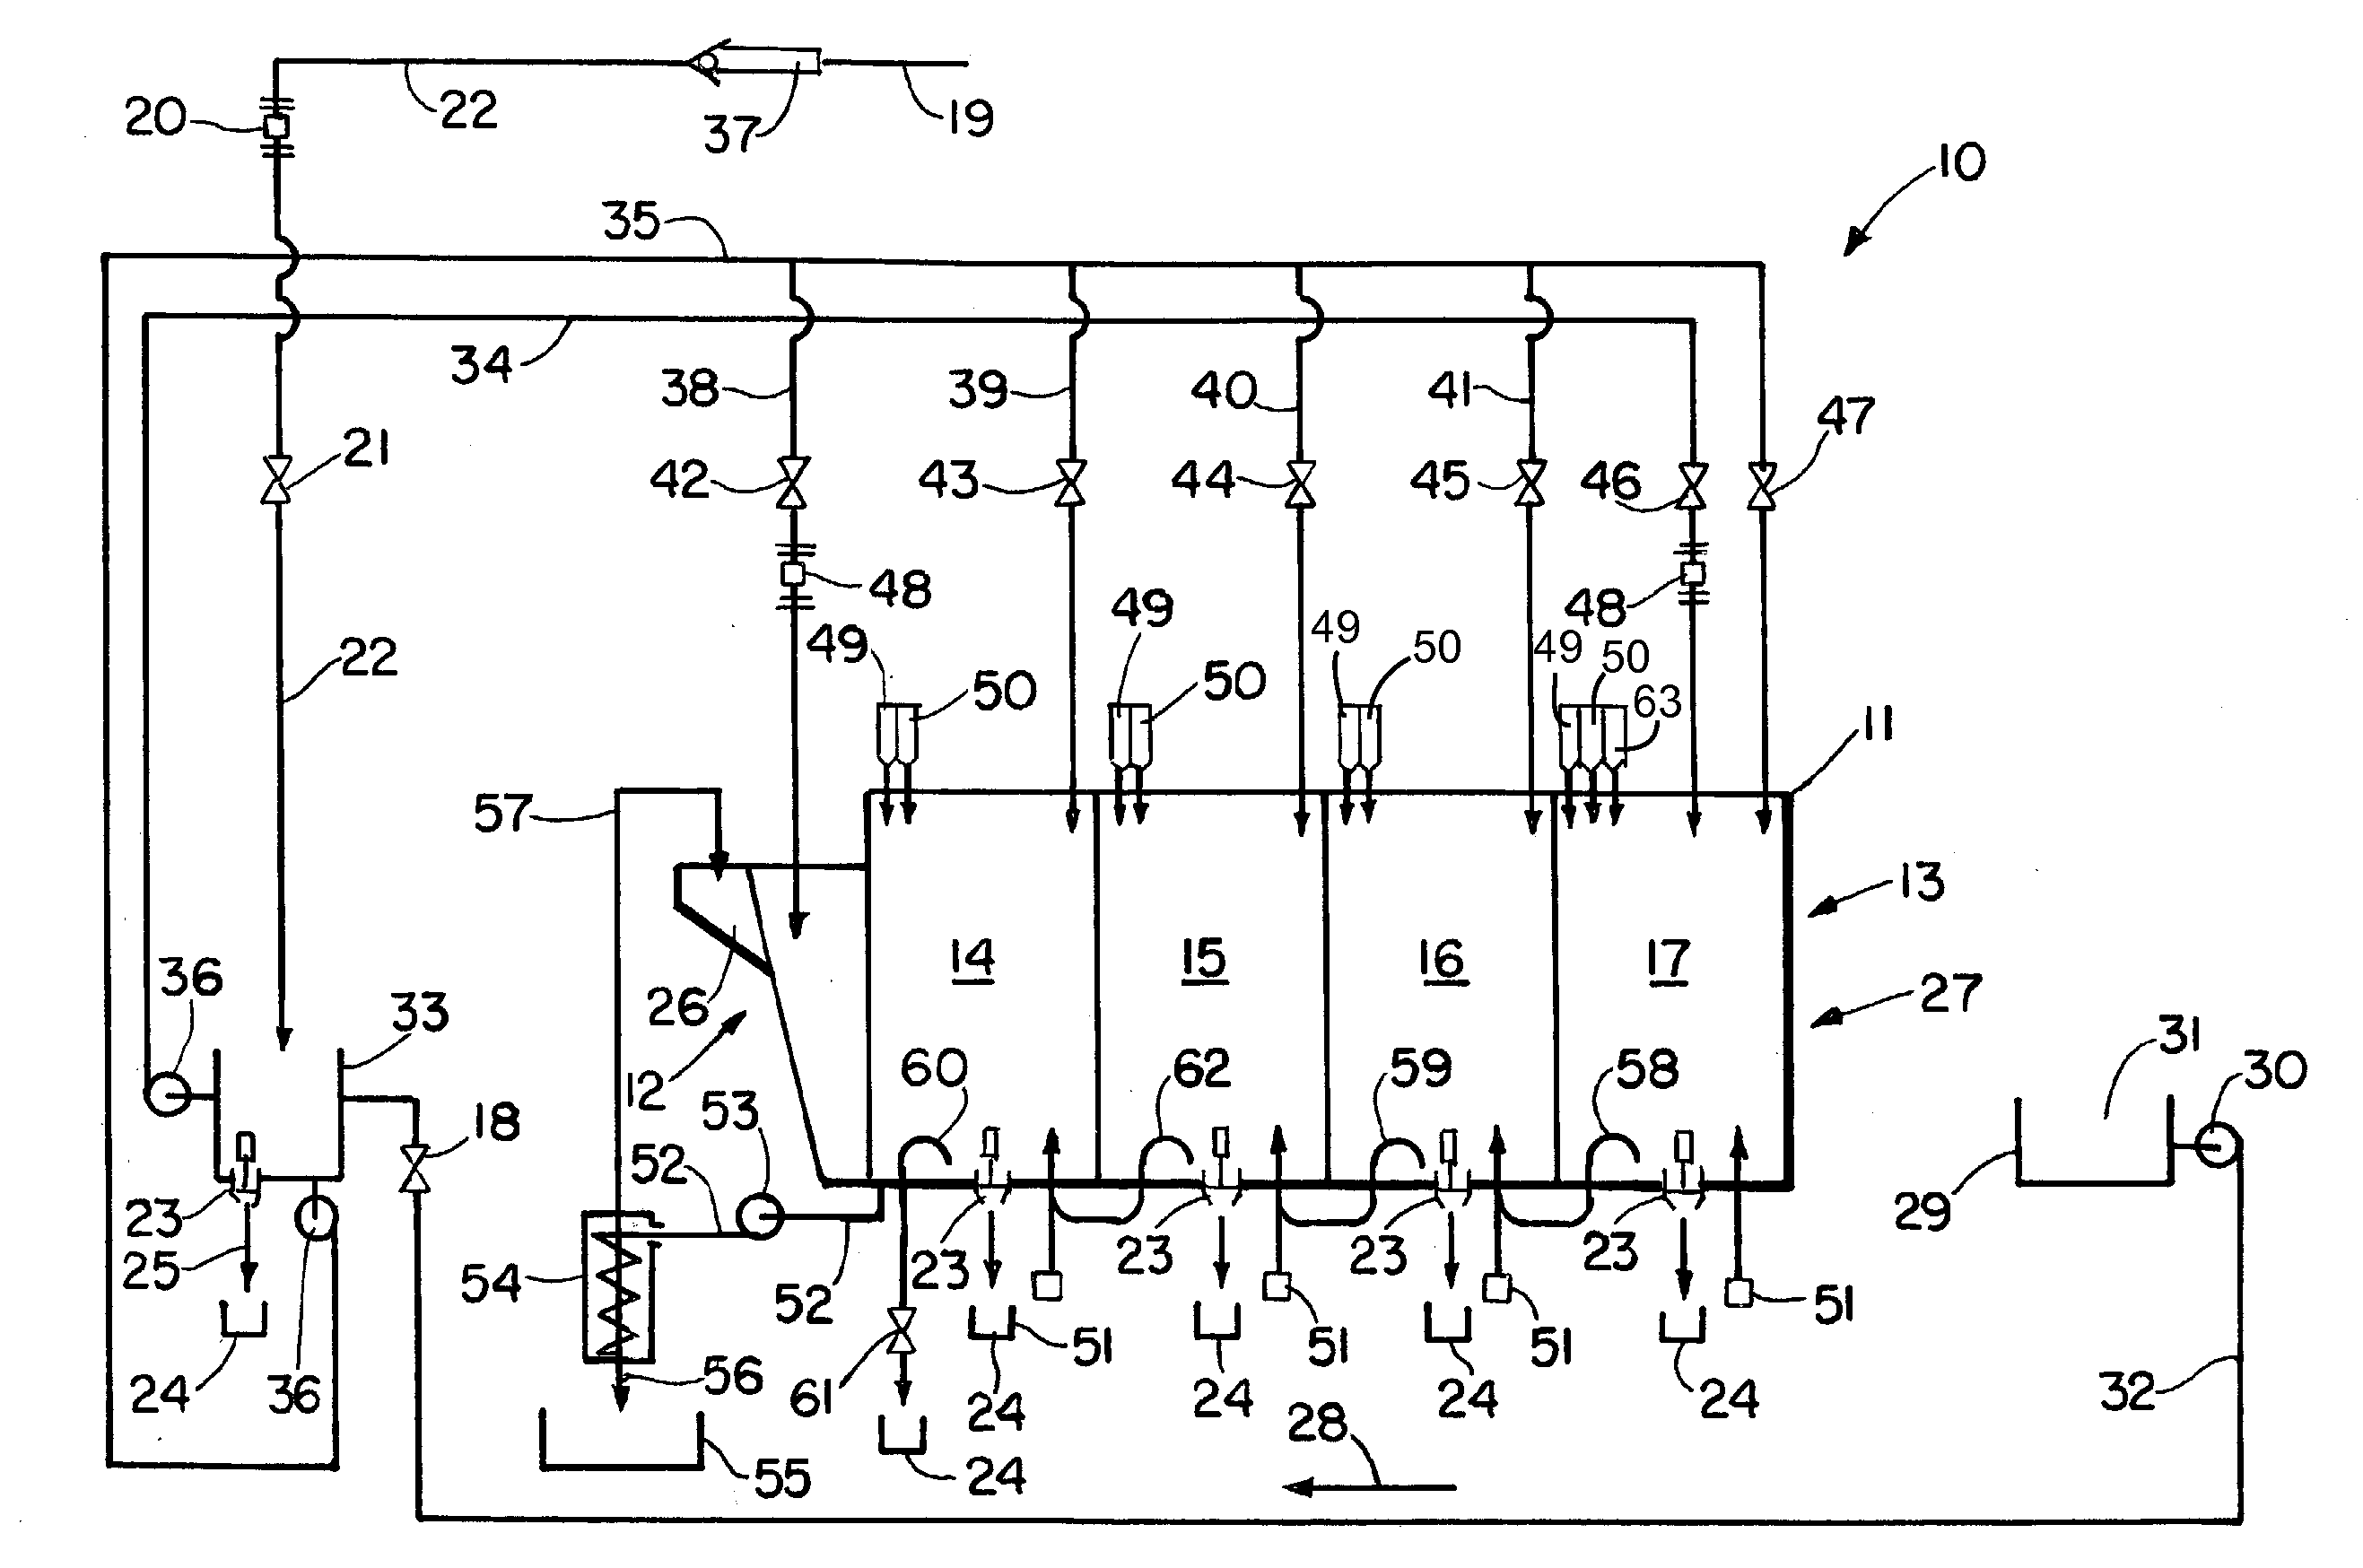 Floor mat and particulate laden material washing apparatus and method